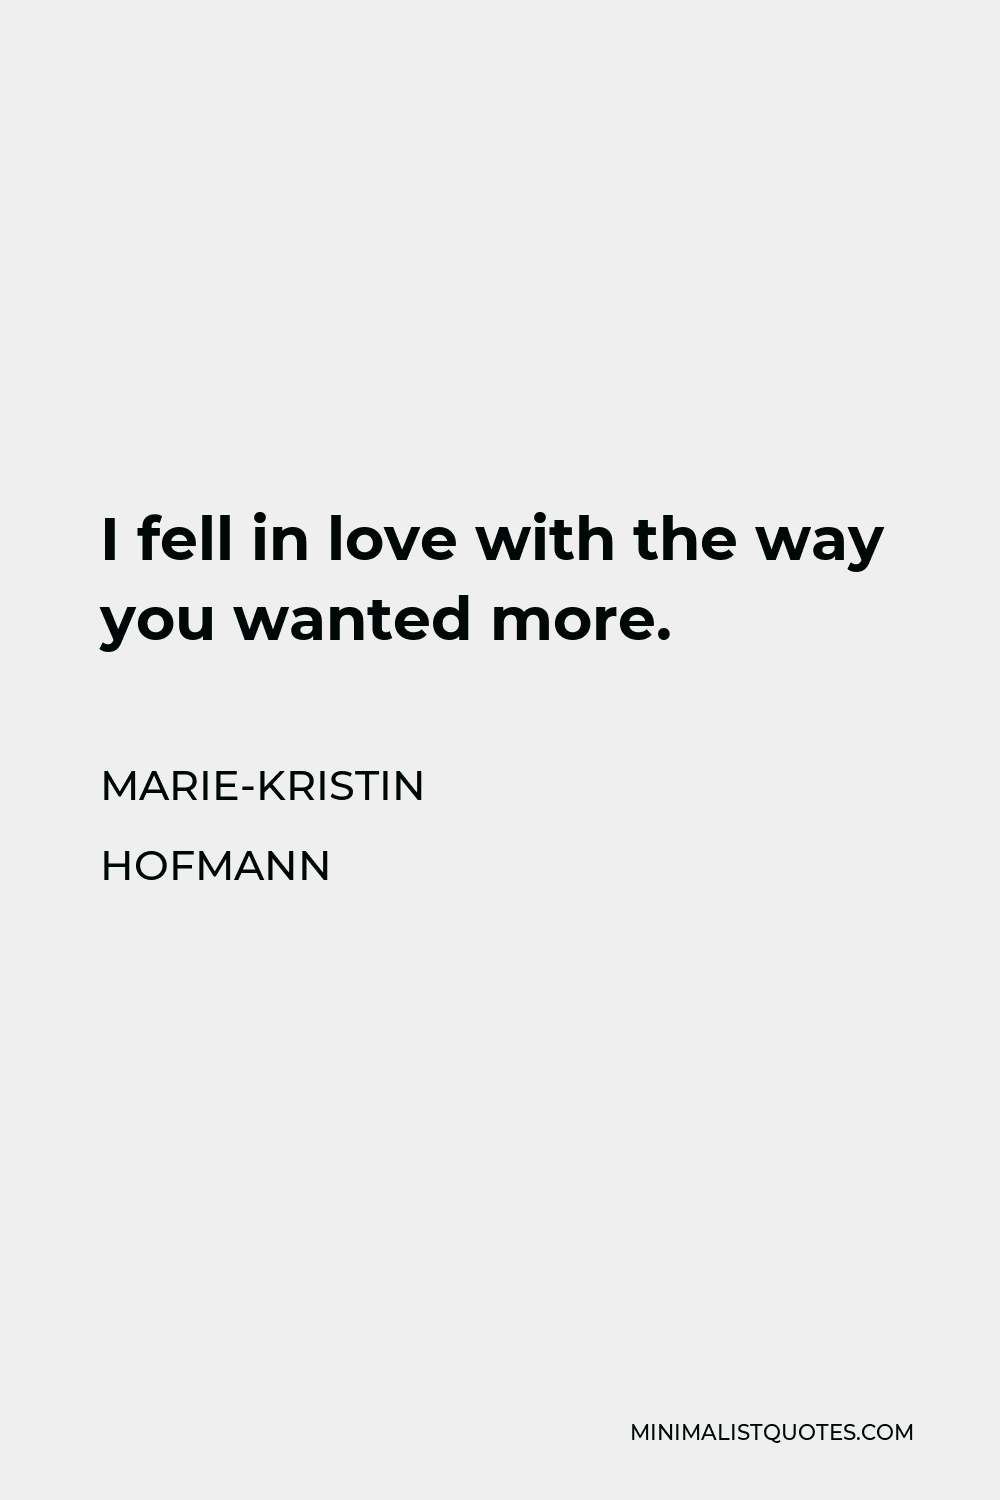 Marie-Kristin Hofmann Quote - I fell in love with the way you wanted more.